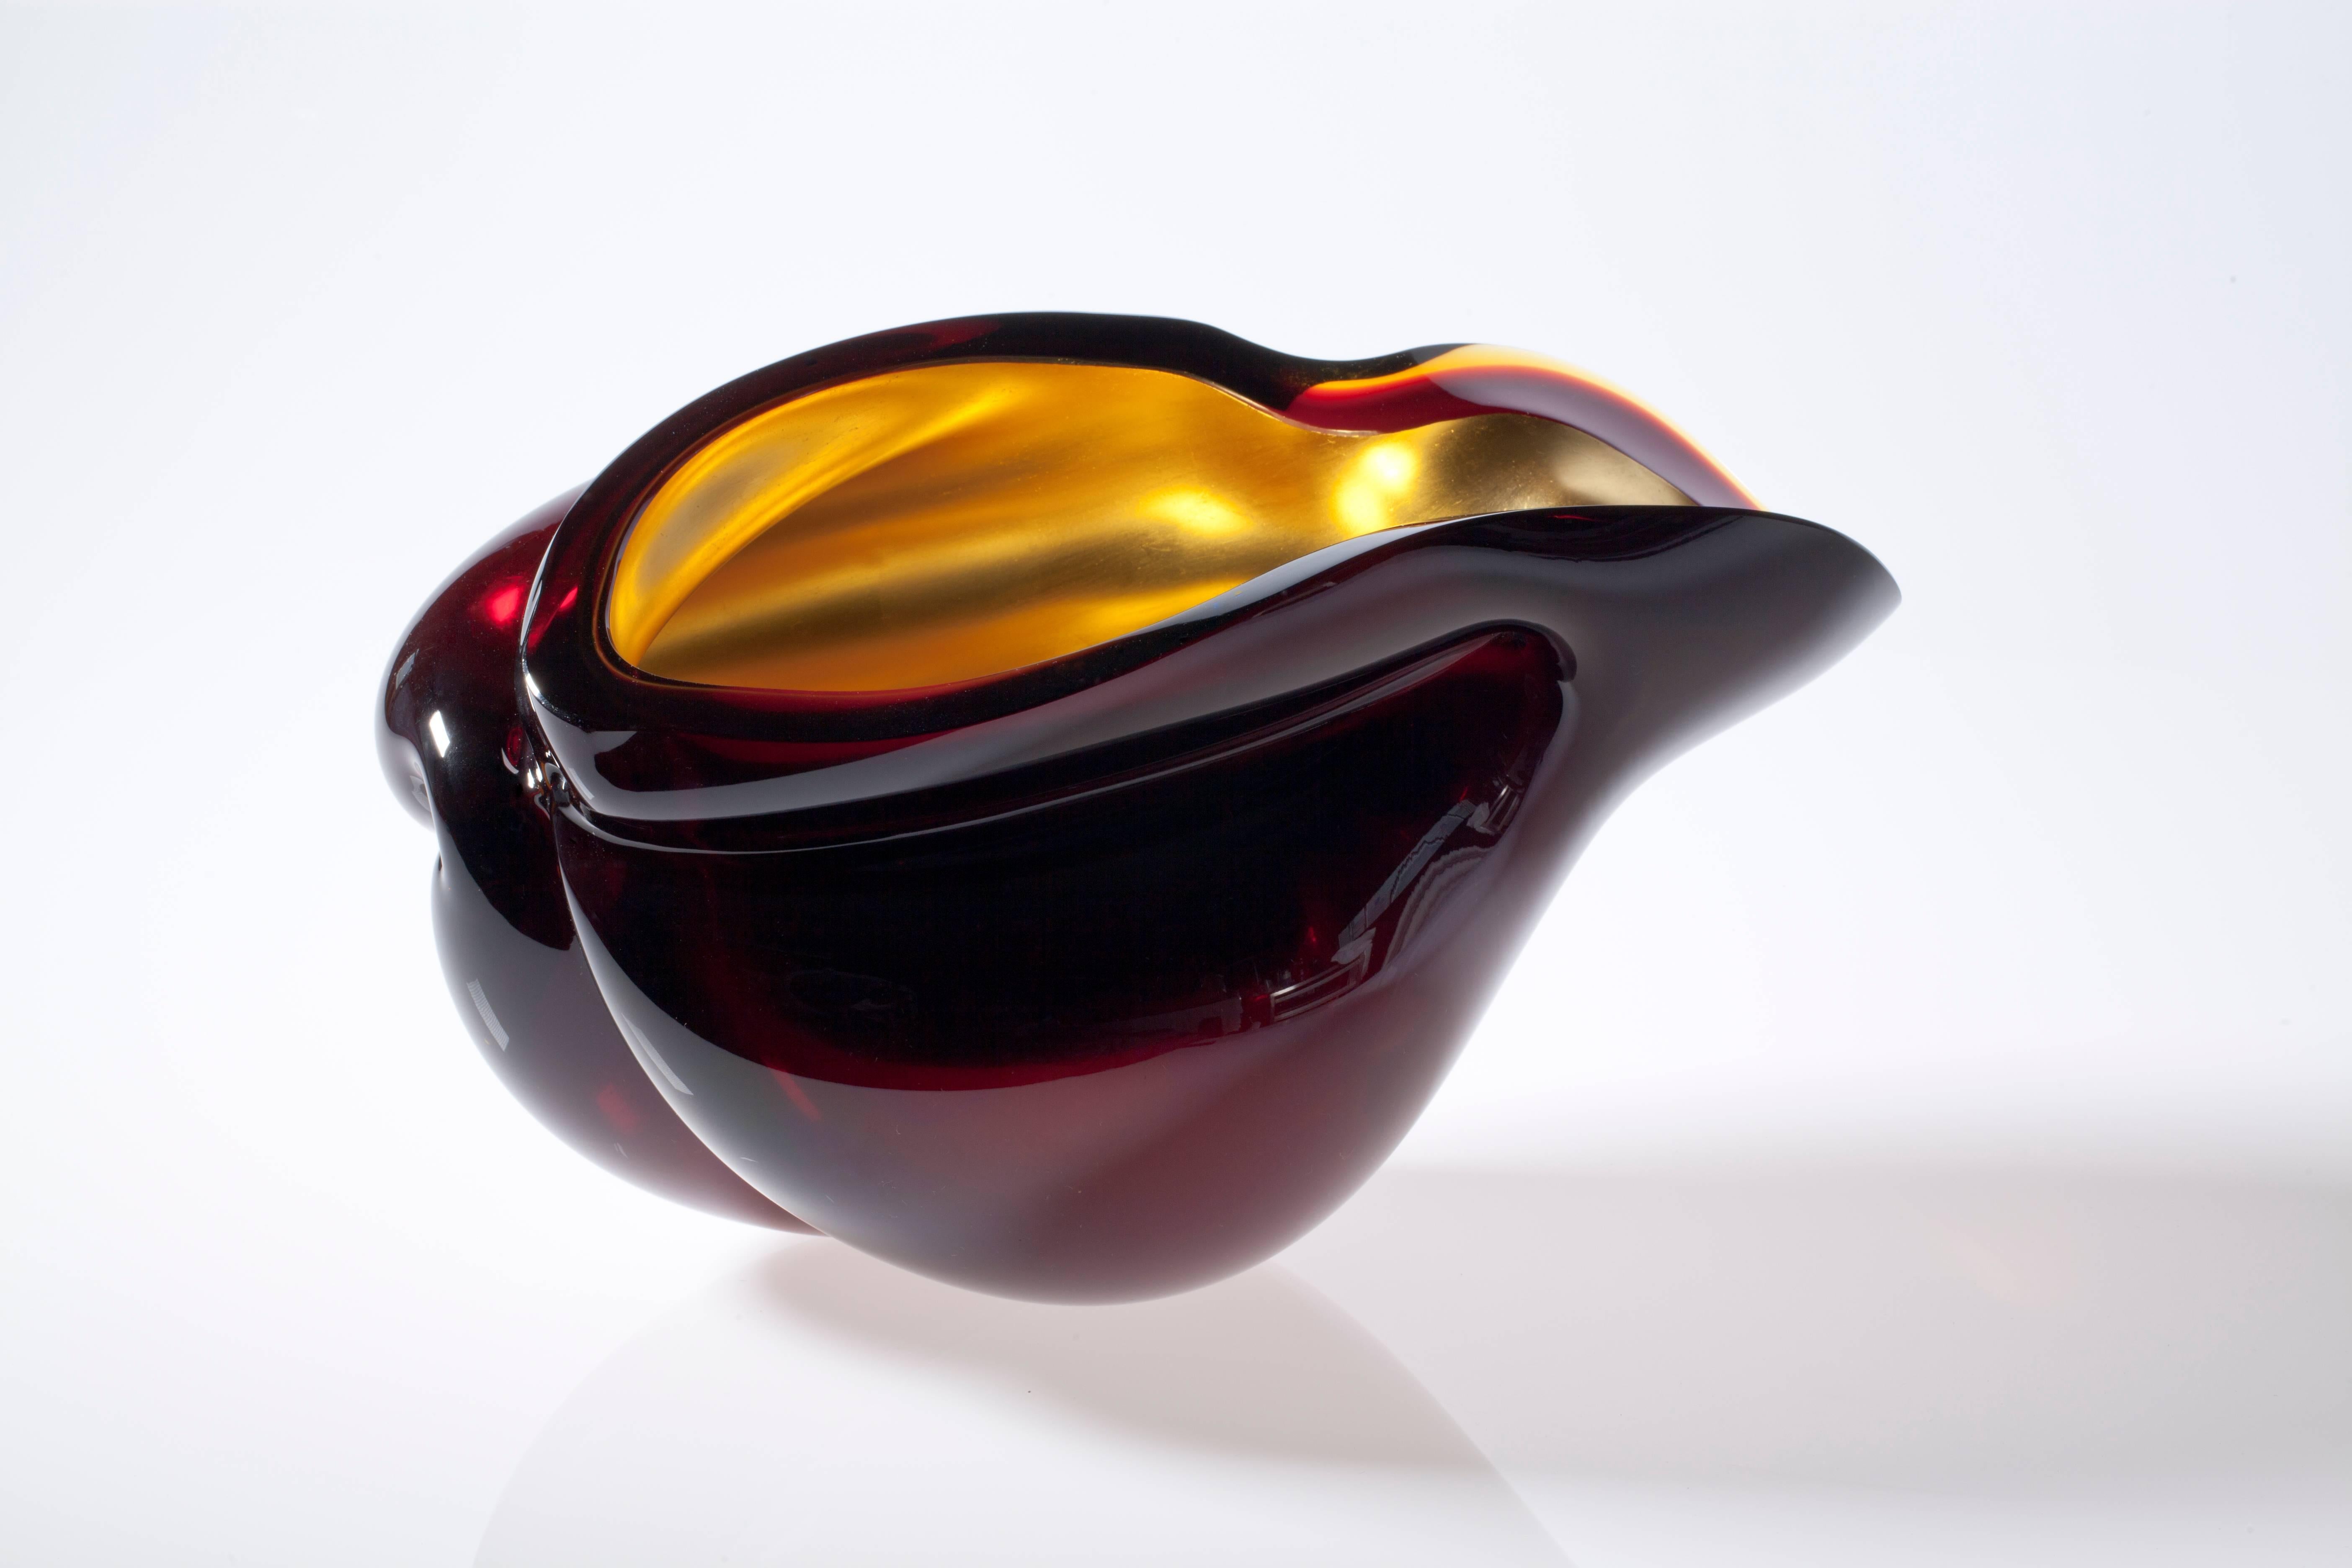 This unique glass object is designed by Barbara Nanning and executed at Novy Bor, Czech Republic. This gilded glass object belongs to the 'Verre églomisé' series (2002-2017). It is signed 'B. Nanning 2003. CZ 76'.

Since 2001, Nanning travels to